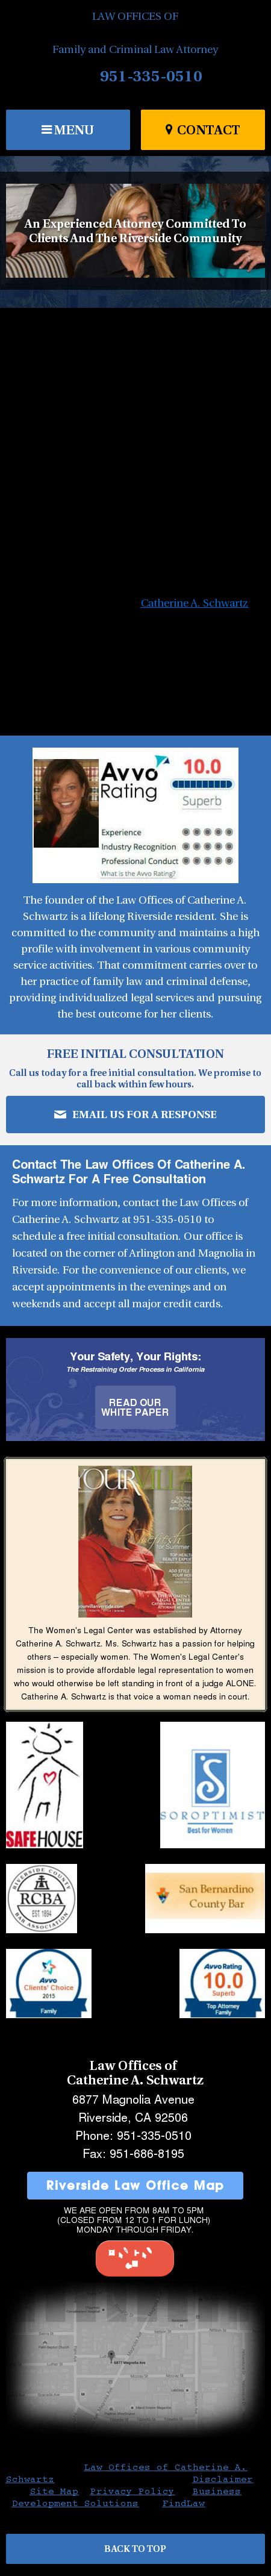 Law Offices of Catherine A. Schwartz - Riverside CA Lawyers